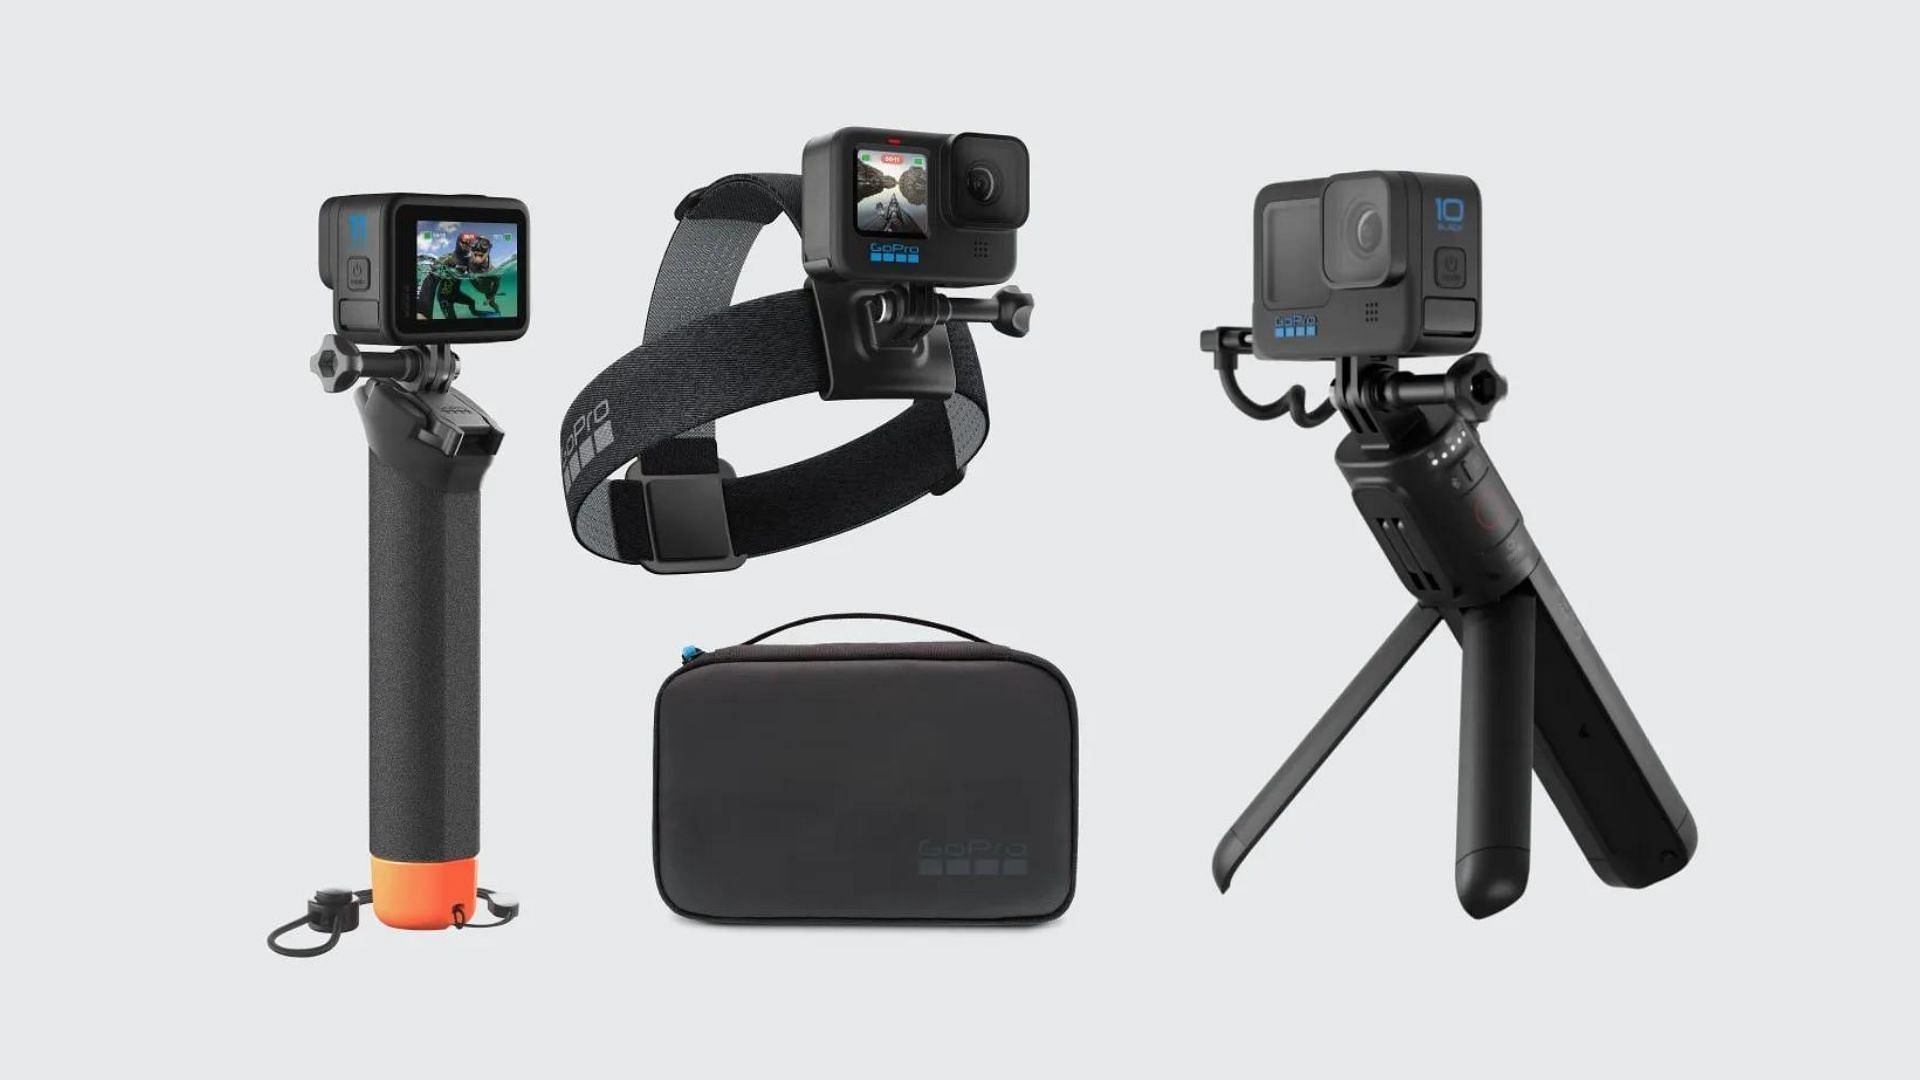 Travel accessories for the GoPro Hero cameras (Image via GoPro)